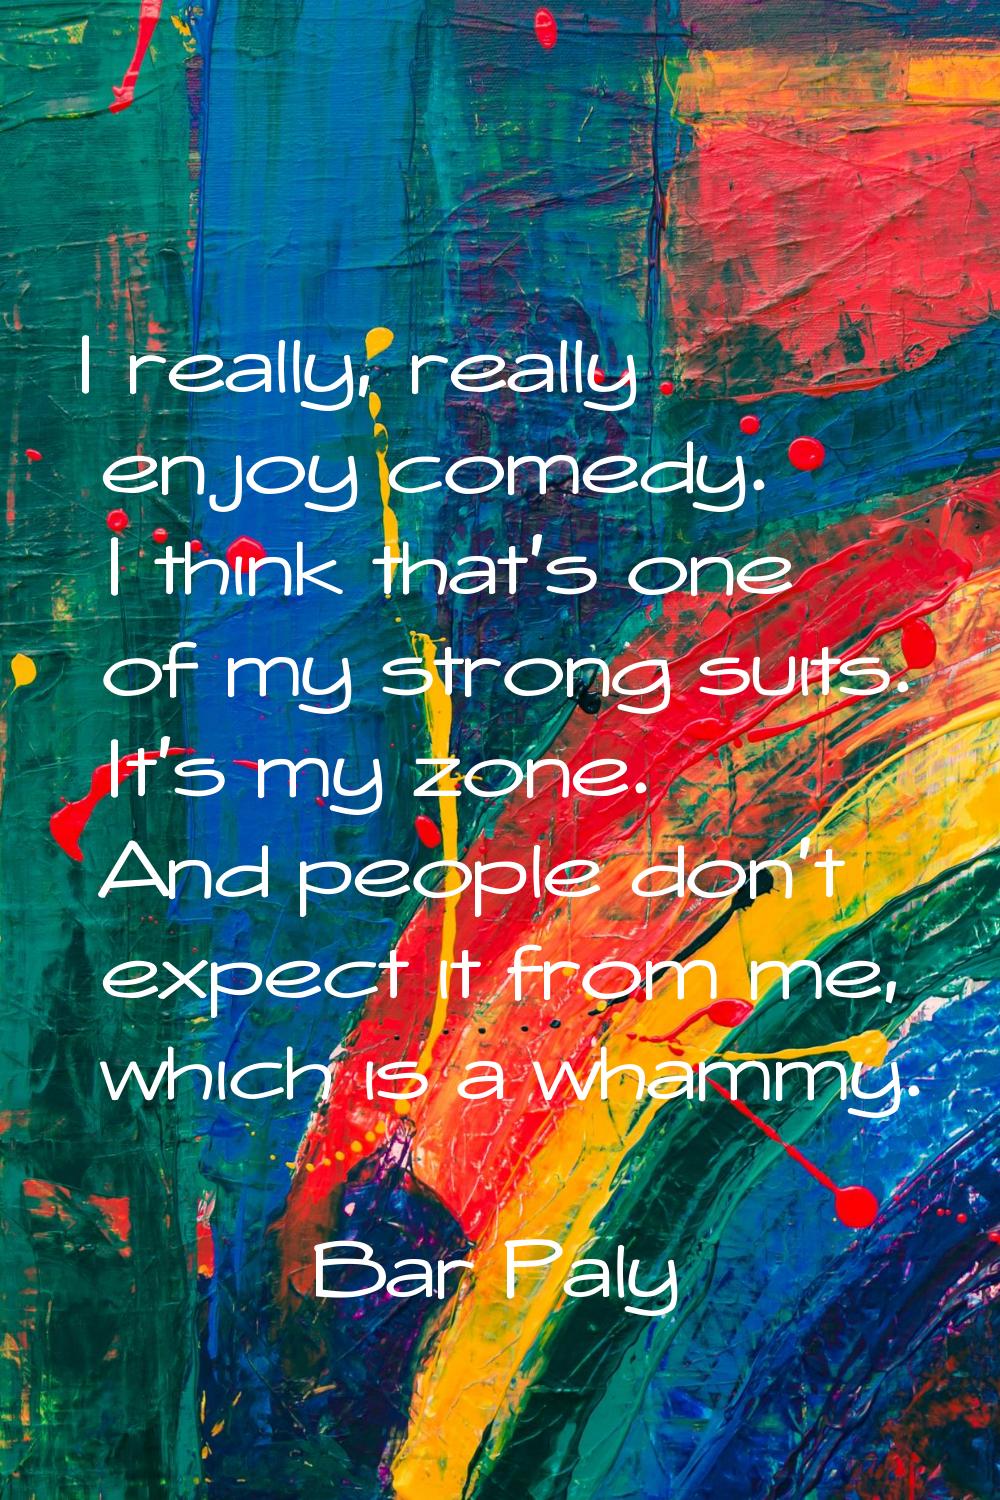 I really, really enjoy comedy. I think that's one of my strong suits. It's my zone. And people don'